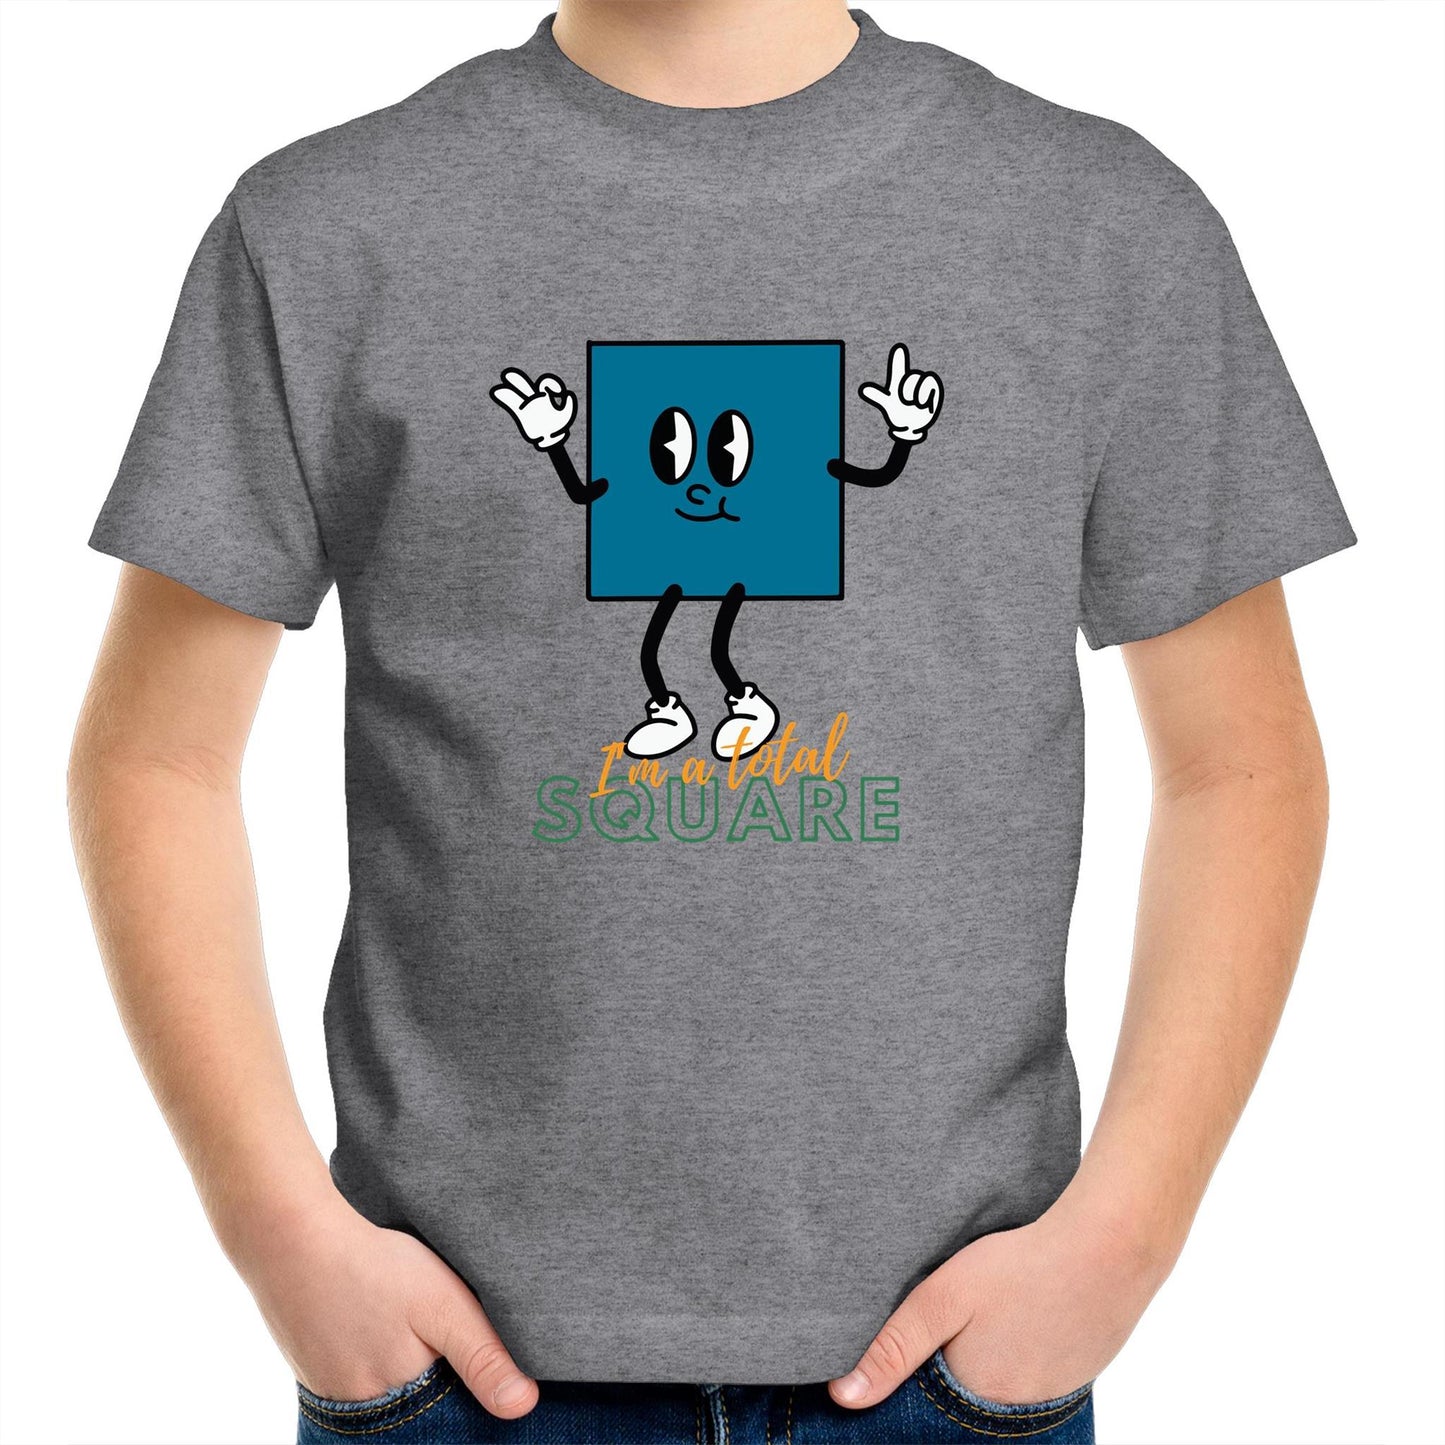 I'm A Total Square - Kids Youth Crew T-Shirt Grey Marle Kids Youth T-shirt Funny Science